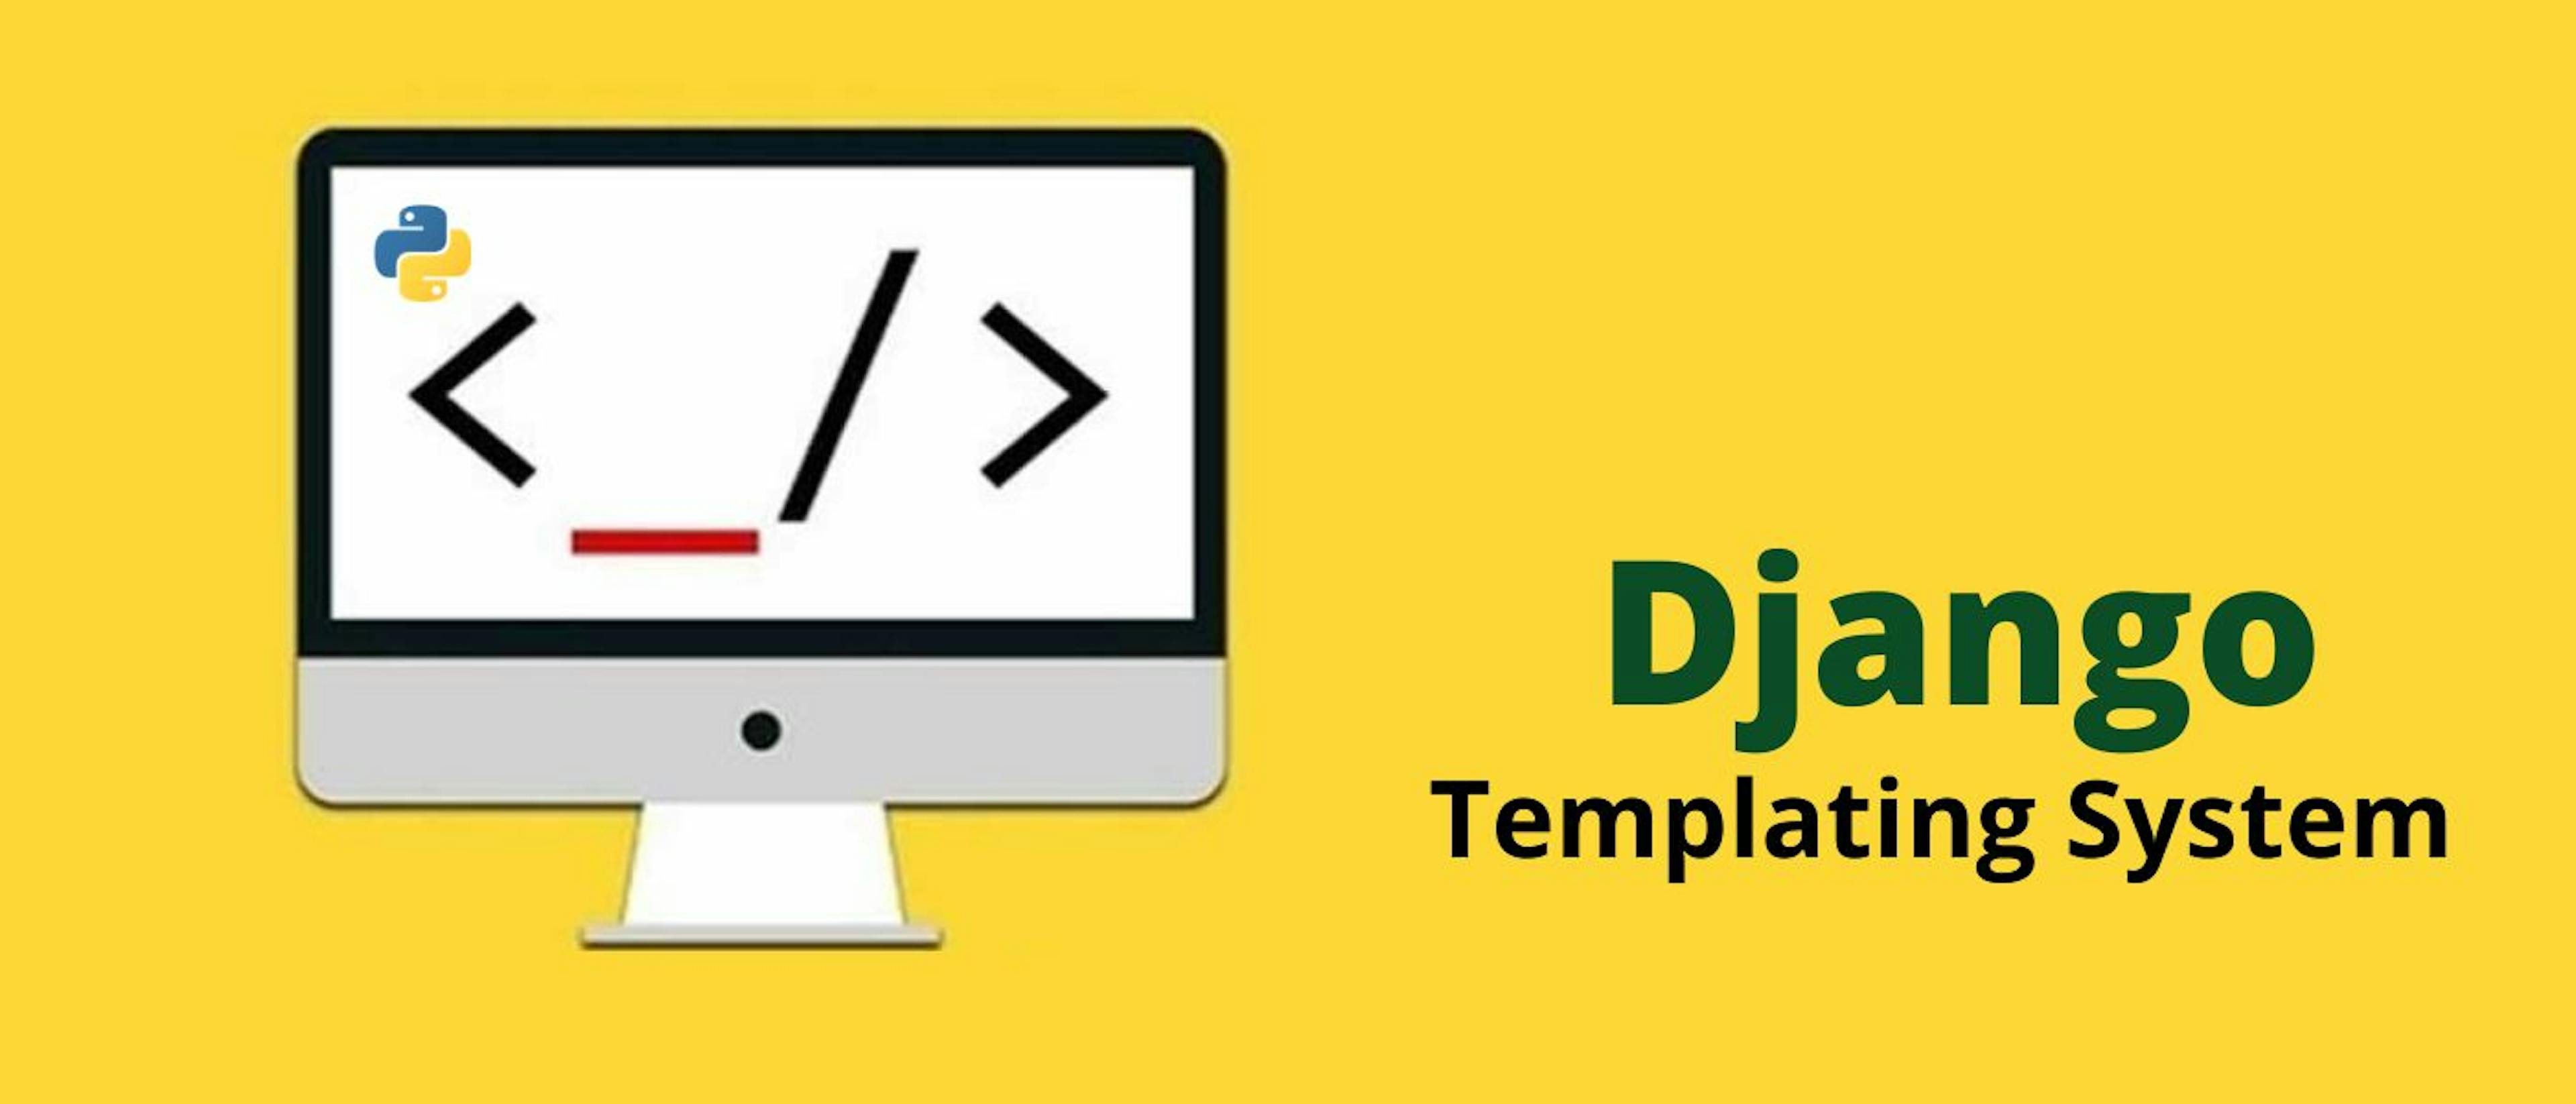 /how-to-use-the-django-templating-system-efficiently-i11v33bi feature image